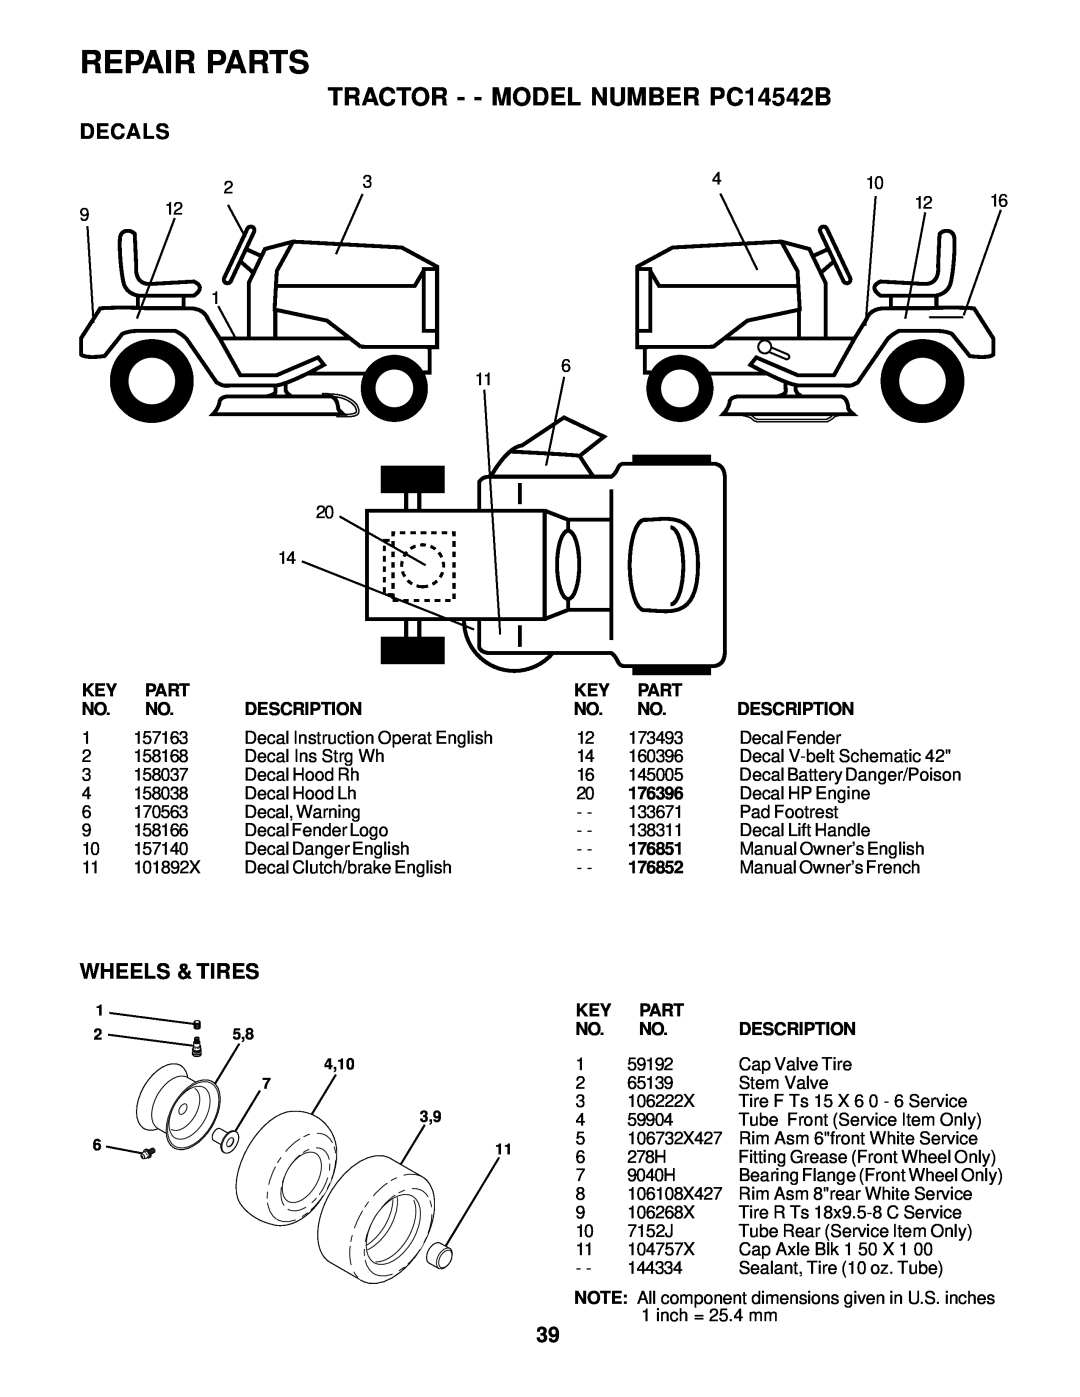 Poulan 176851 owner manual Decals, Wheels & Tires, Repair Parts, TRACTOR - - MODEL NUMBER PC14542B, 4,10 